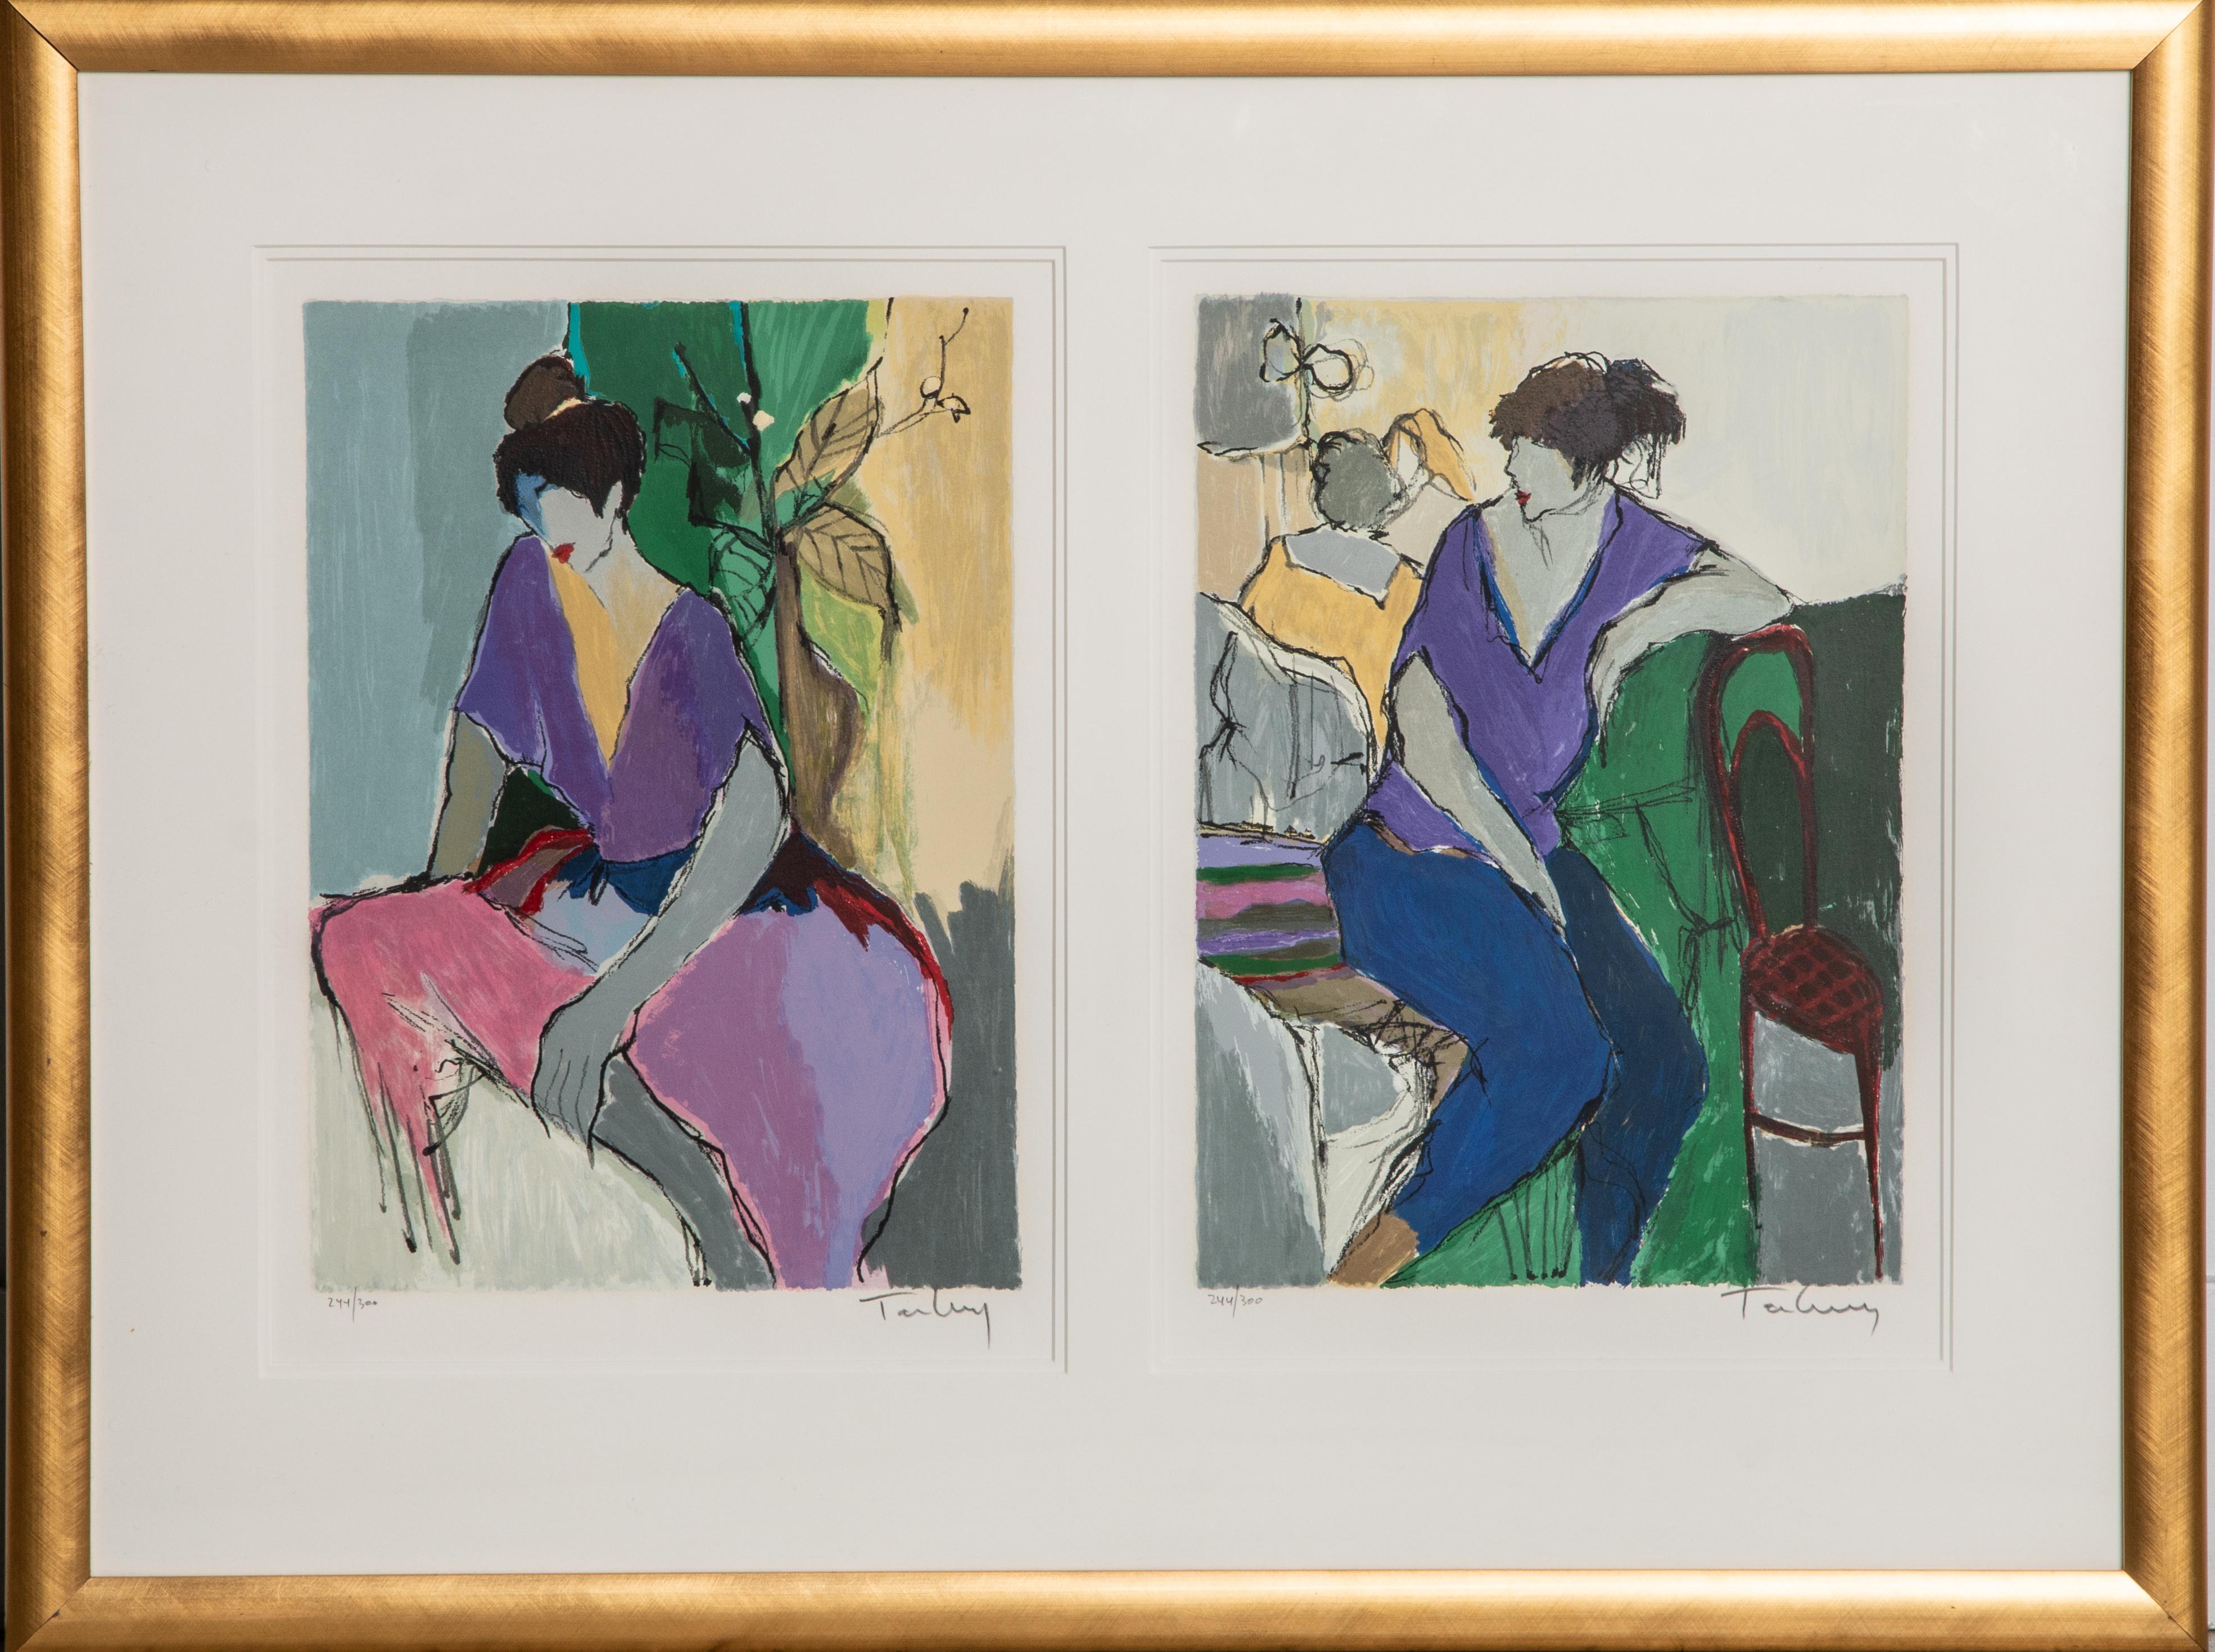 Itzchak Tarkay (Israeli, 1935-2012). Two Serigraphs 'Woman in Purple & Pink' & 'Woman in Purple & Blue'. Serigraphs framed as a diptych. Two works, each signed 'Tarkay' in pencil lower right, and numbered in pencil, 244/300, lower left. Dimensions: 